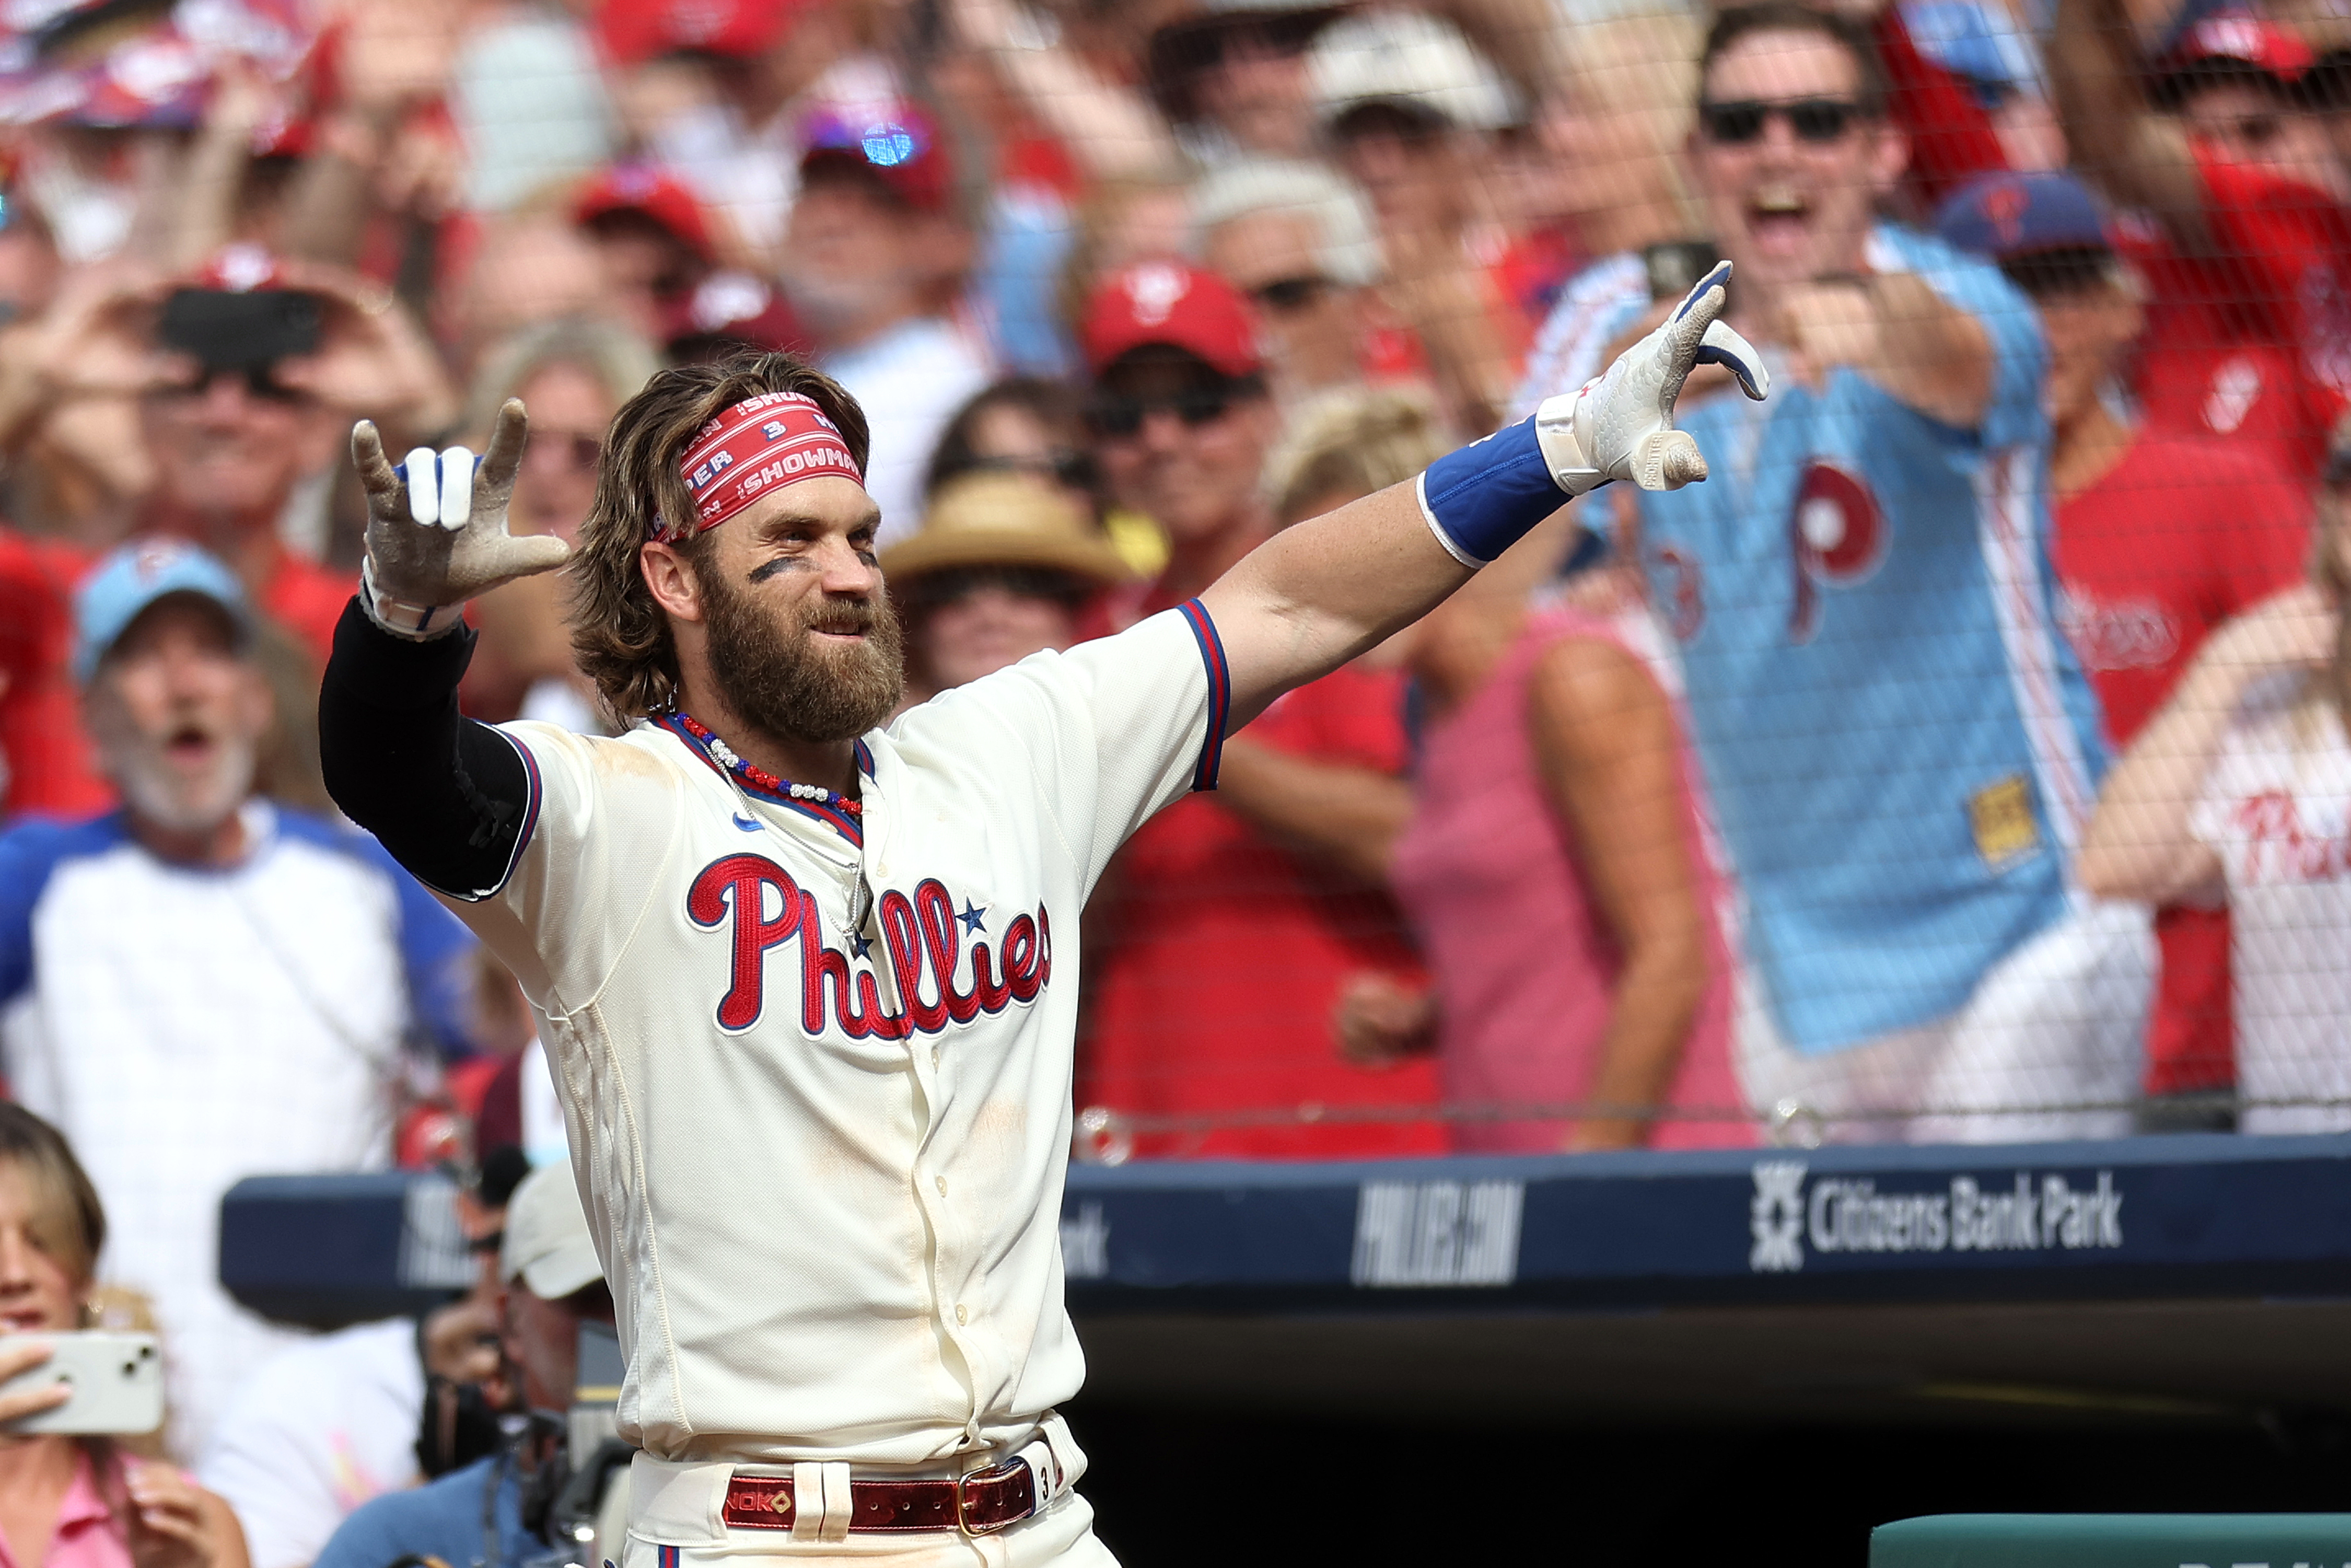 Bryce Harper of the Philadelphia Phillies celebrates after hitting a two-run homer during the eighth inning in the game against the Los Angeles Angels at Citizens Bank Park in Philadelphia, Pennsylvania, August 30, 2023. /CFP